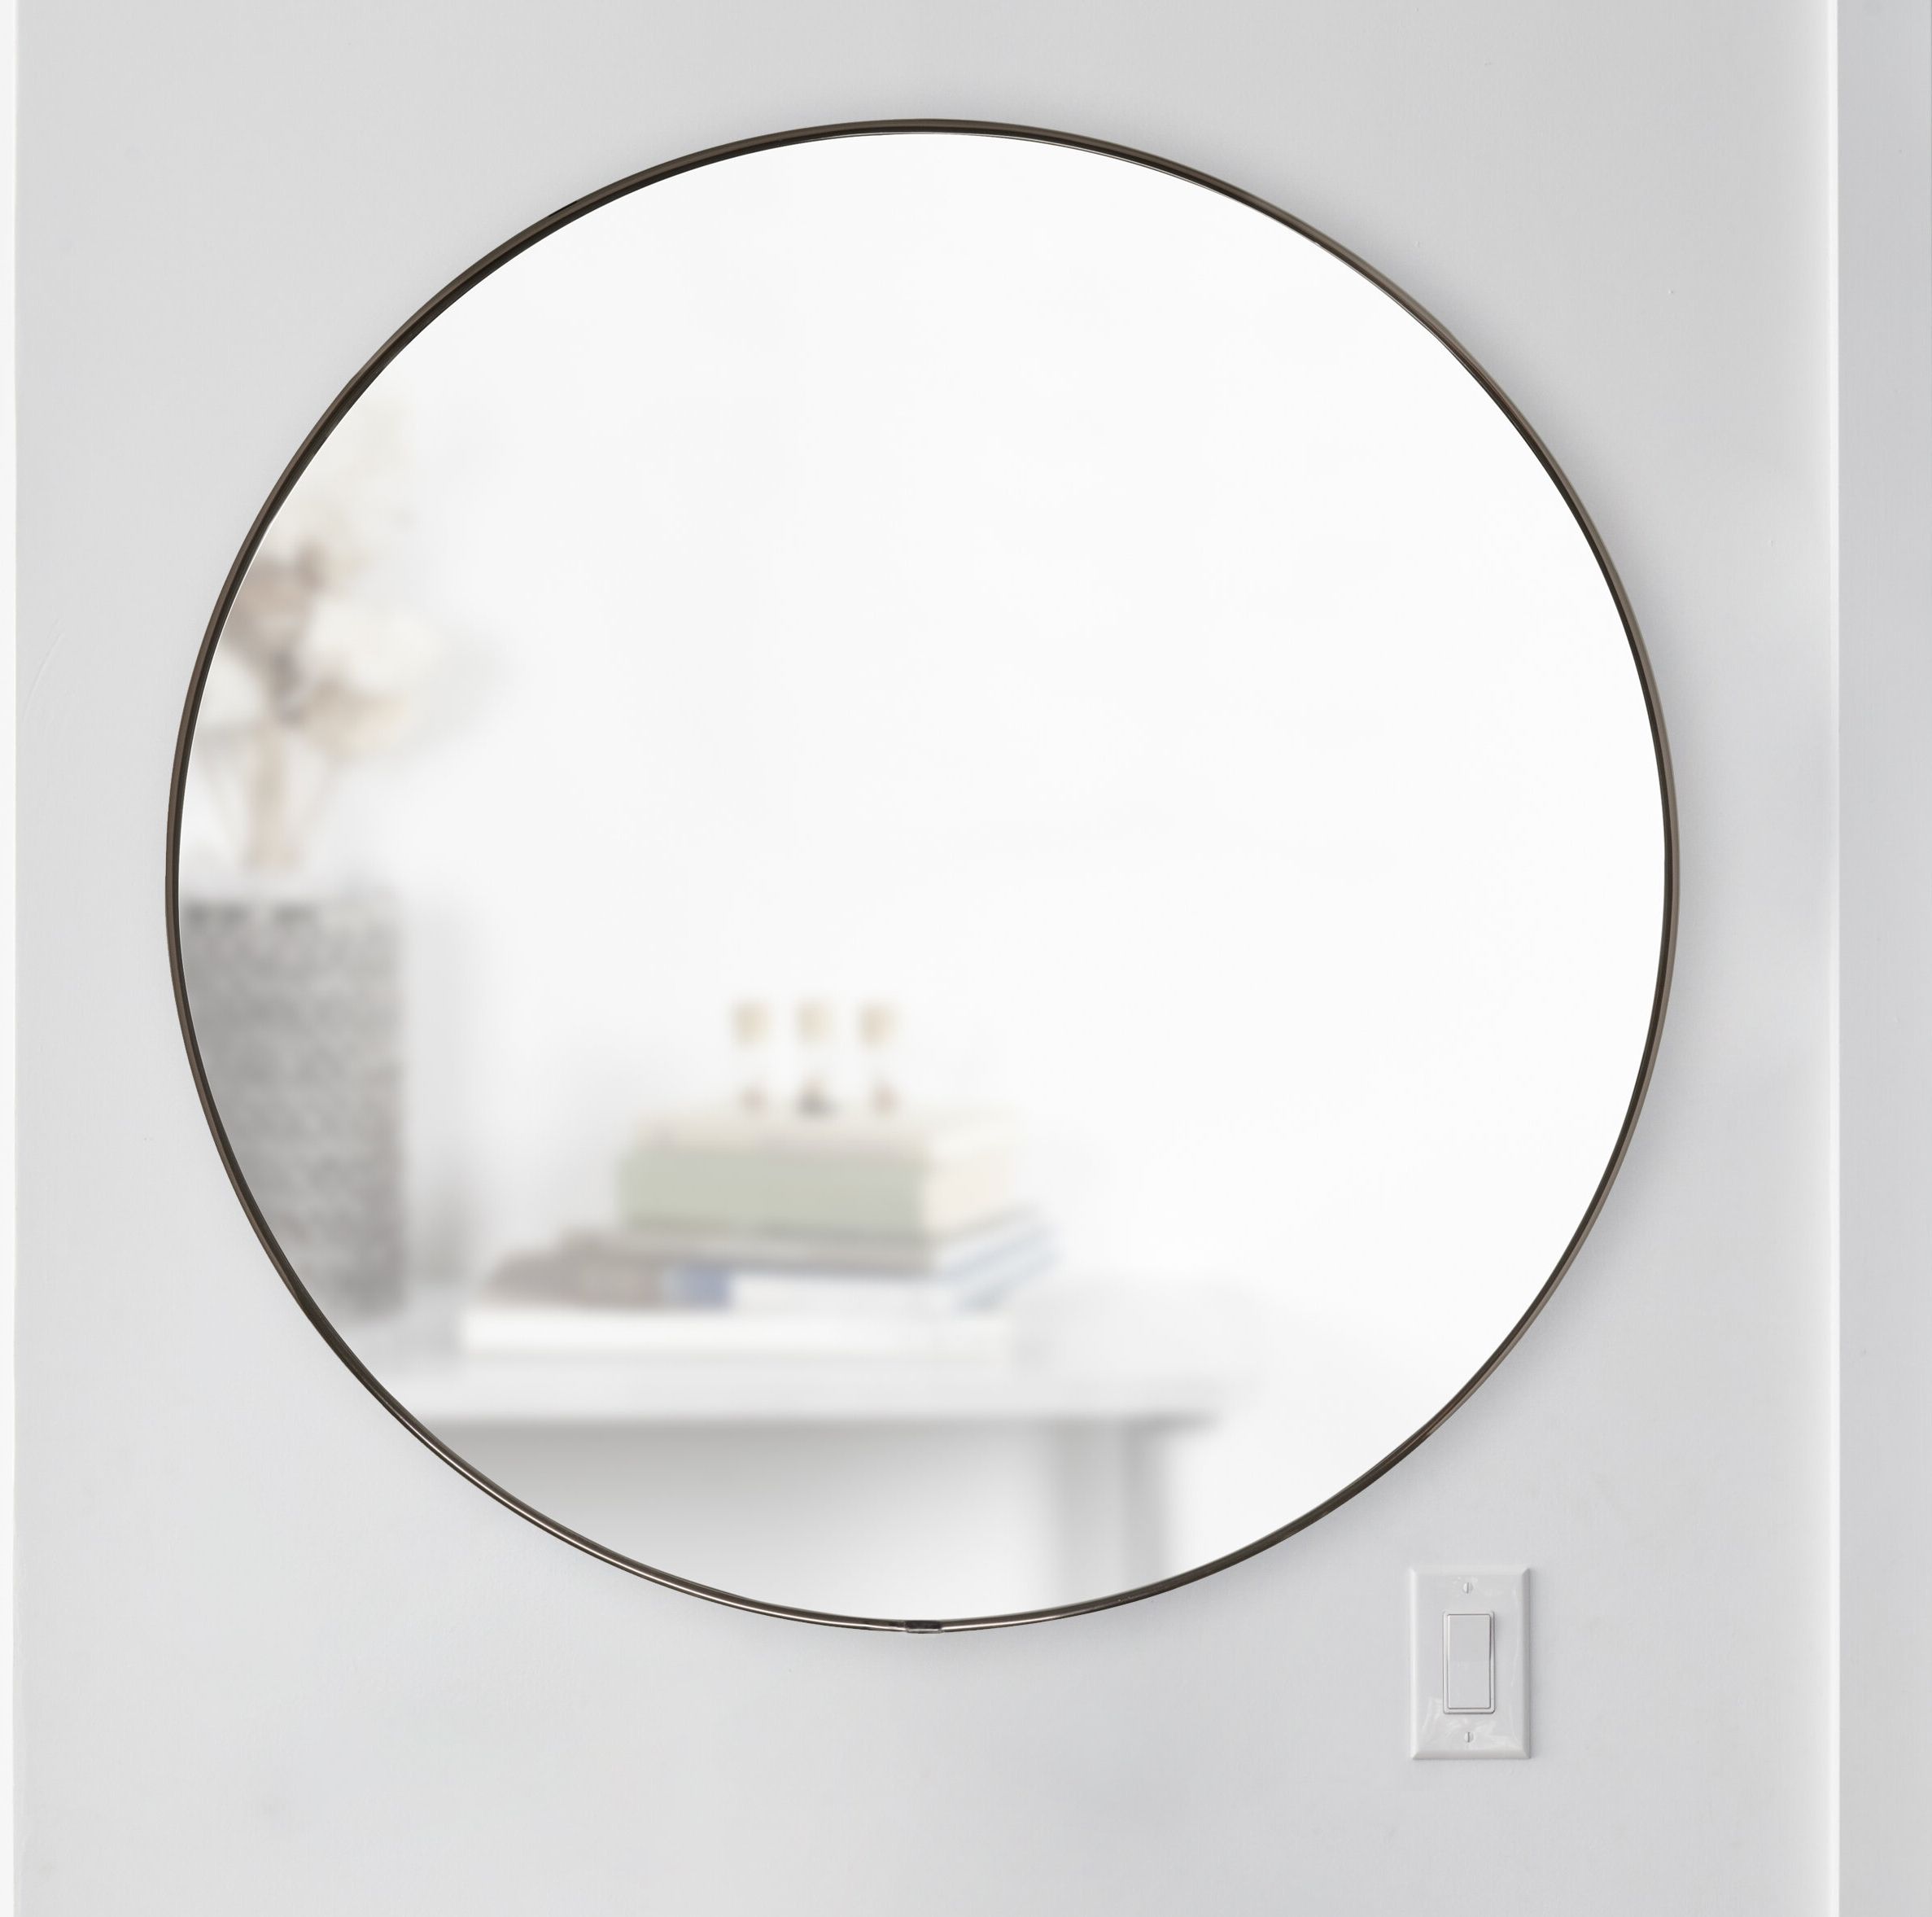 Umbra Hubba Modern & Contemporary Accent Mirror Intended For Well Liked Levan Modern & Contemporary Accent Mirrors (View 8 of 20)